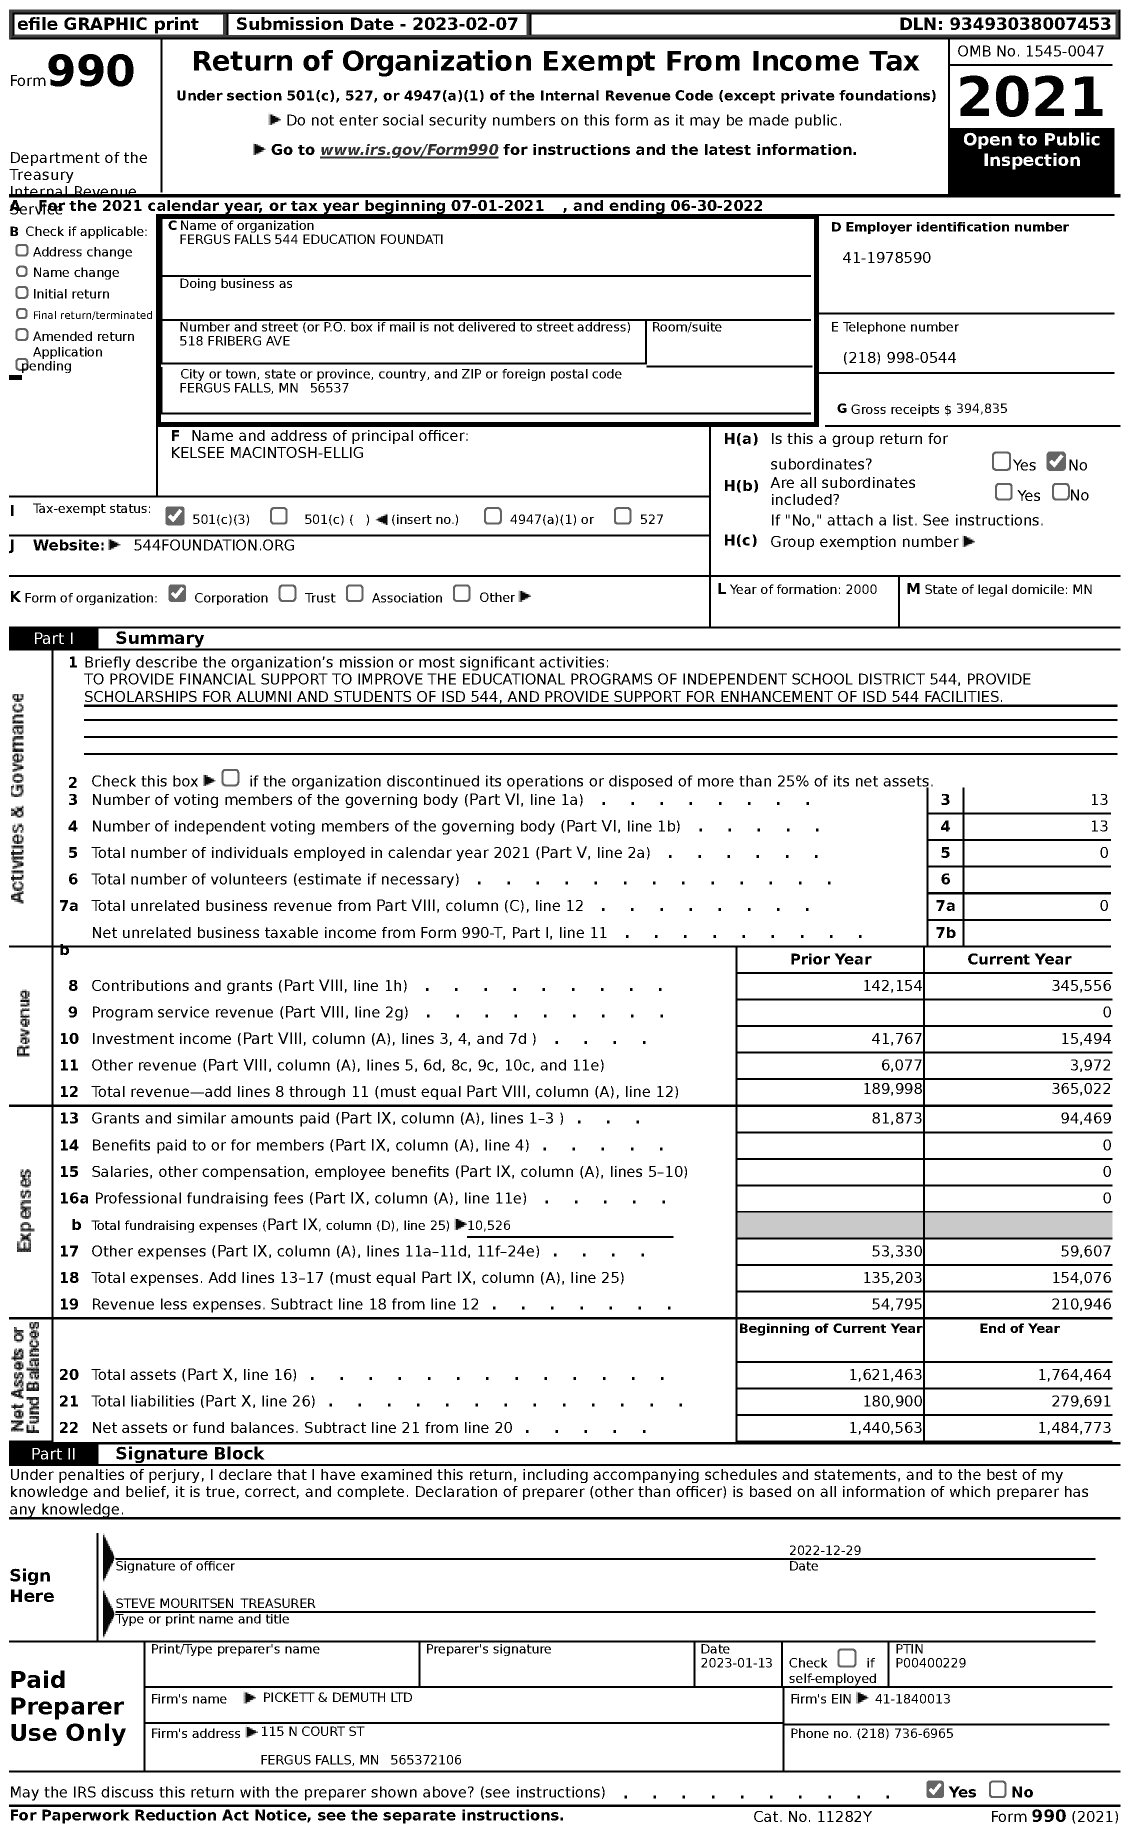 Image of first page of 2021 Form 990 for Fergus Falls 544 Education Foundation